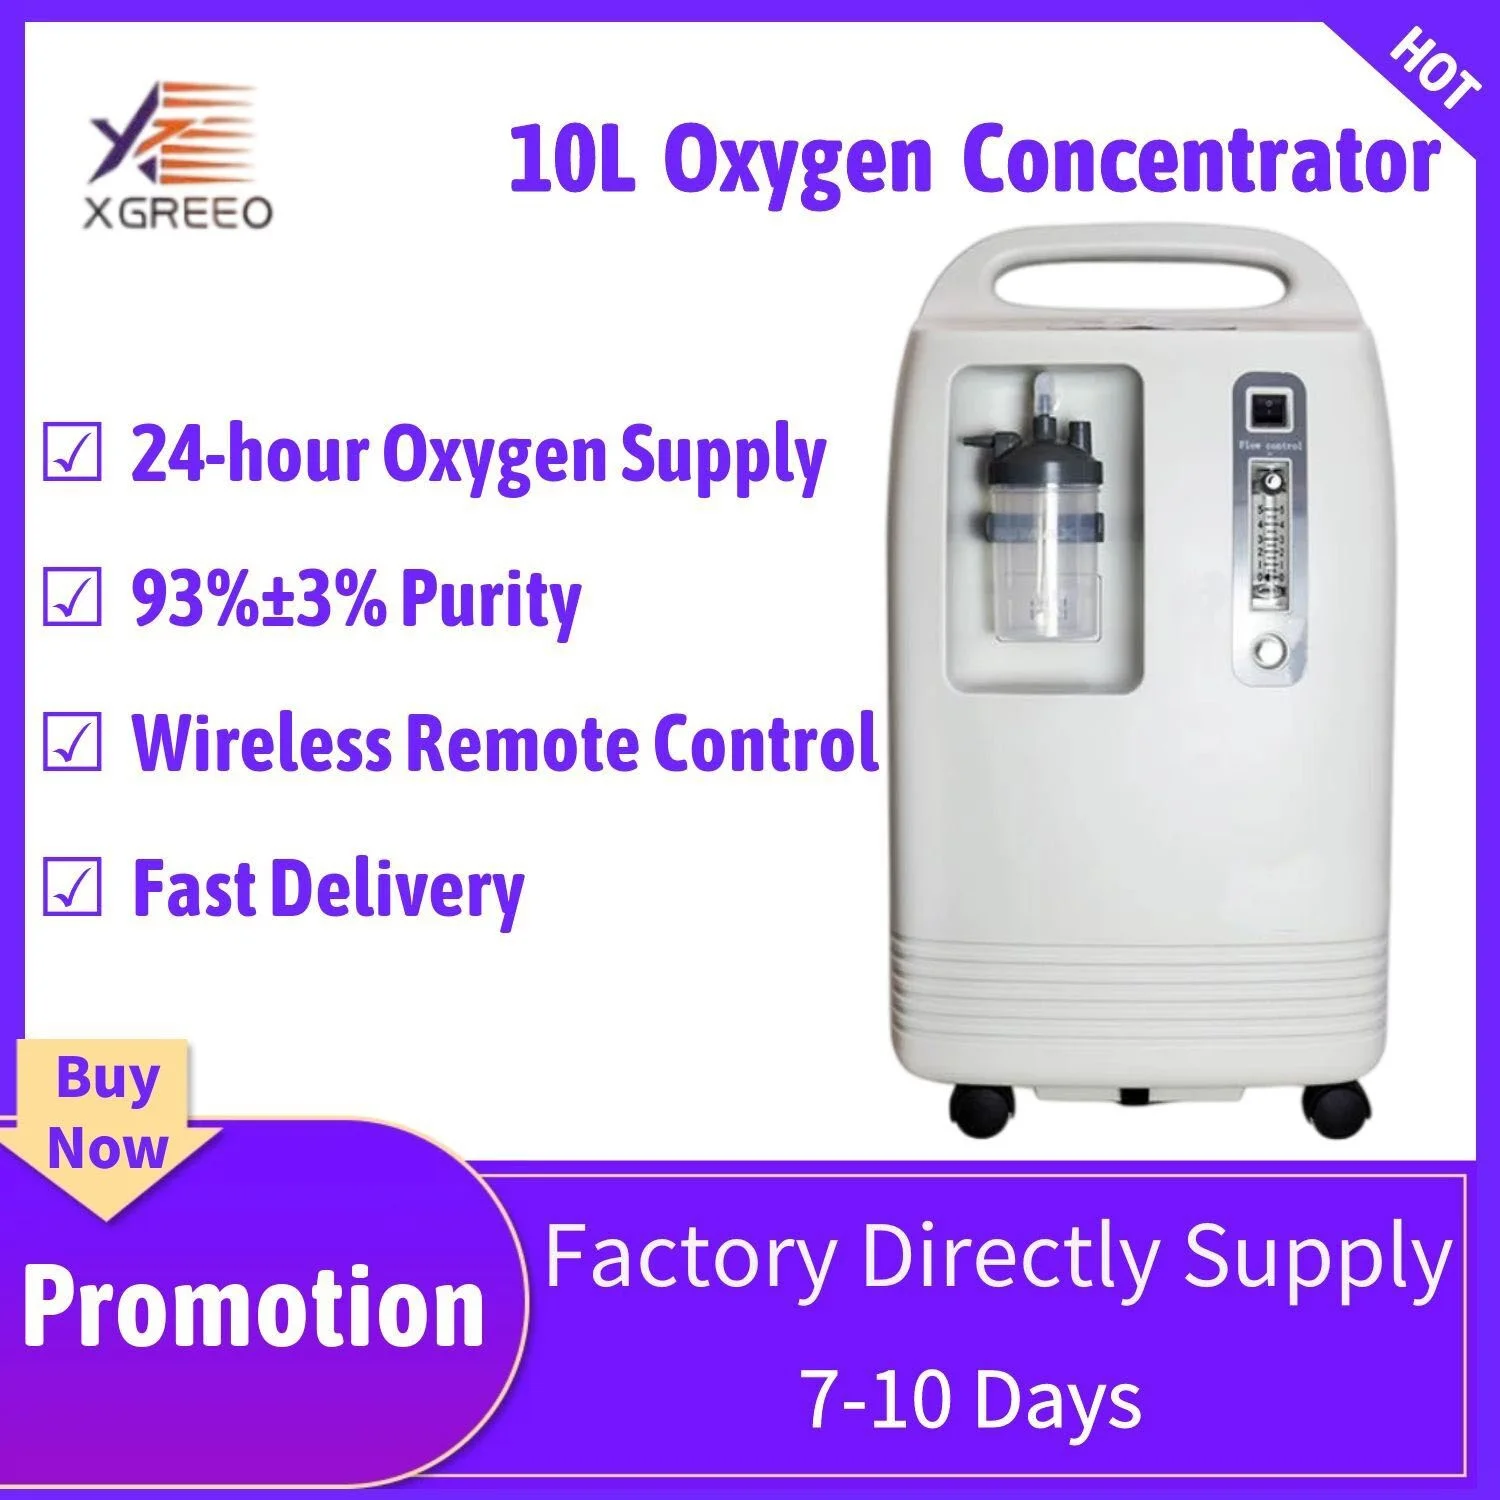 

XGREEO COX-10S Medical Grade Oxygen Concentrator 93% High Purity 10 Liters Oxygen Generator Remote Control Oxygen Machine